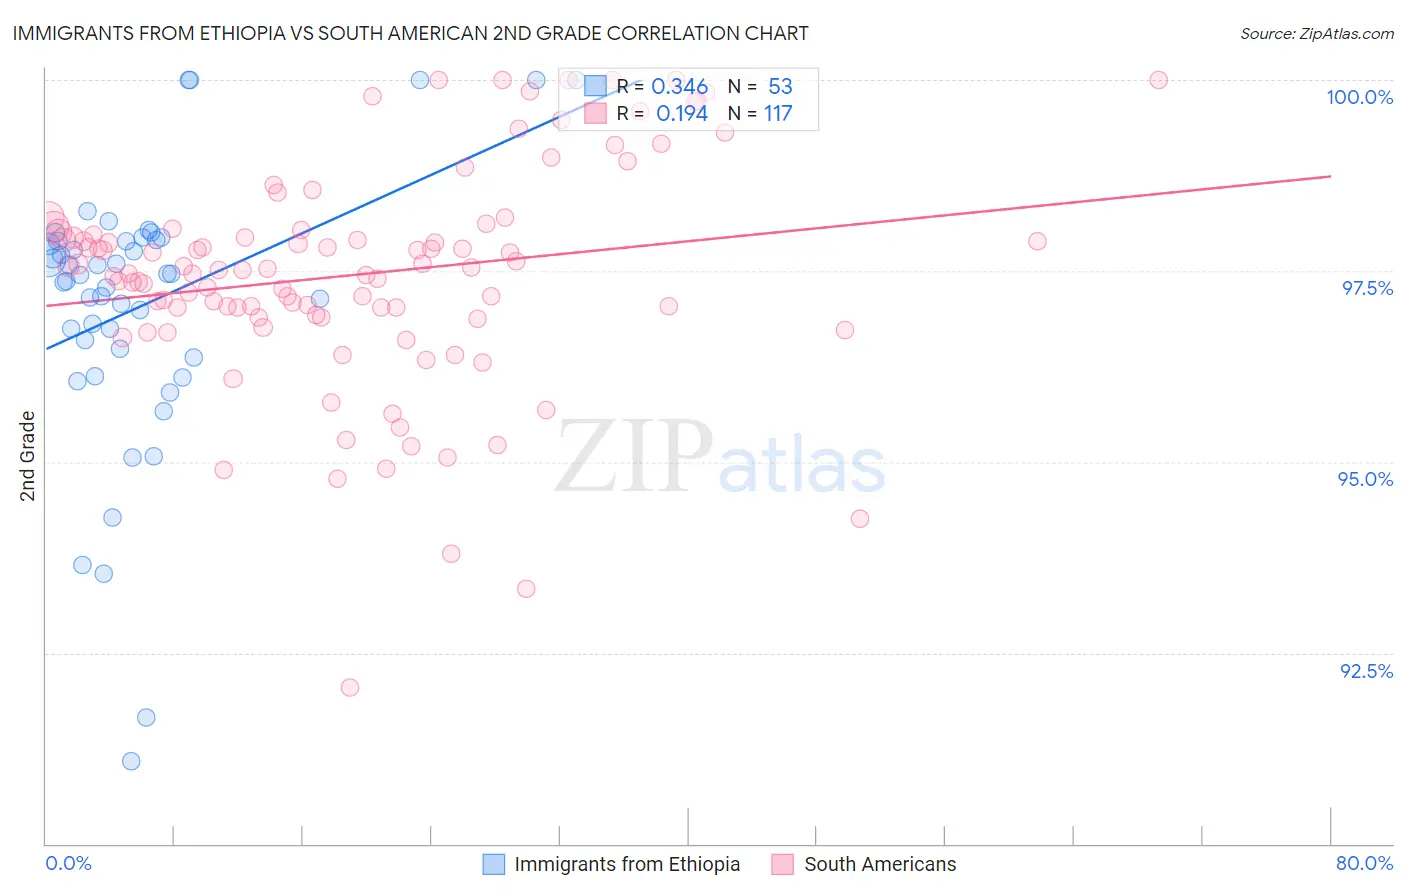 Immigrants from Ethiopia vs South American 2nd Grade